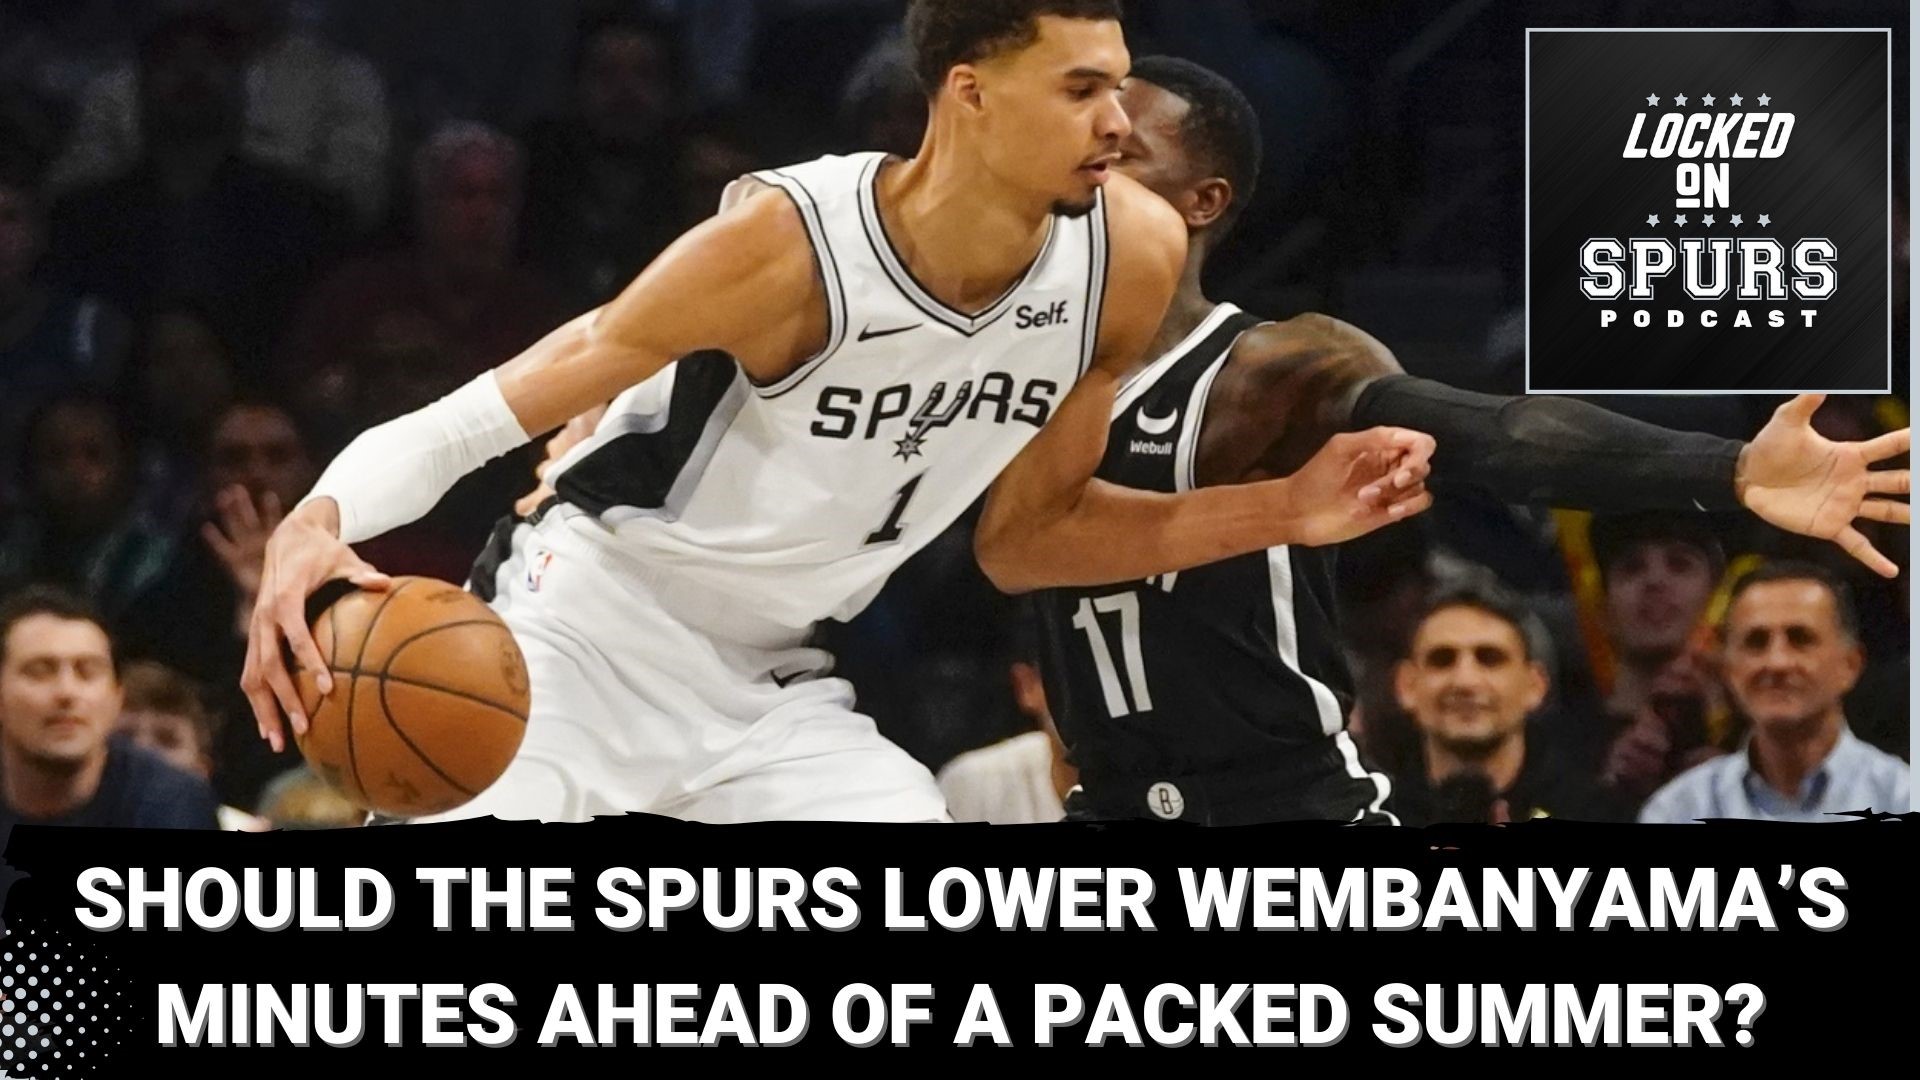 Also, takeaways from the Spurs' loss versus the Rockets.